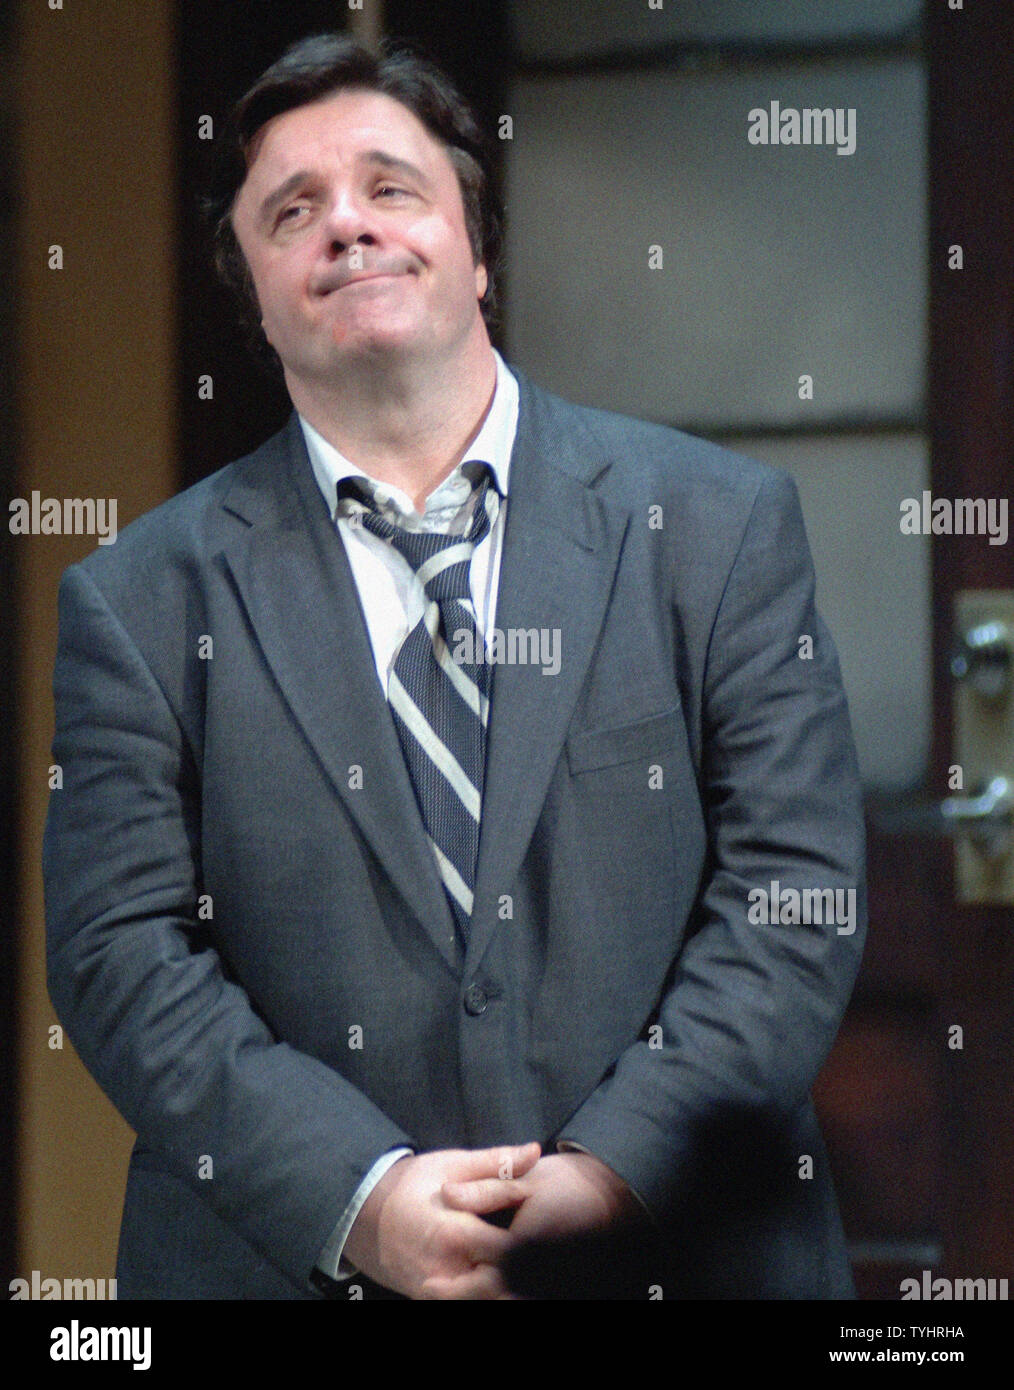 Actor Nathan Lane takes his opening night curtain call bows in the Simon Gray play 'Butley' which opened on Broadway at the Booth theatre on October 25, 2006. (UPI Photo/Ezio Petersen) Stock Photo